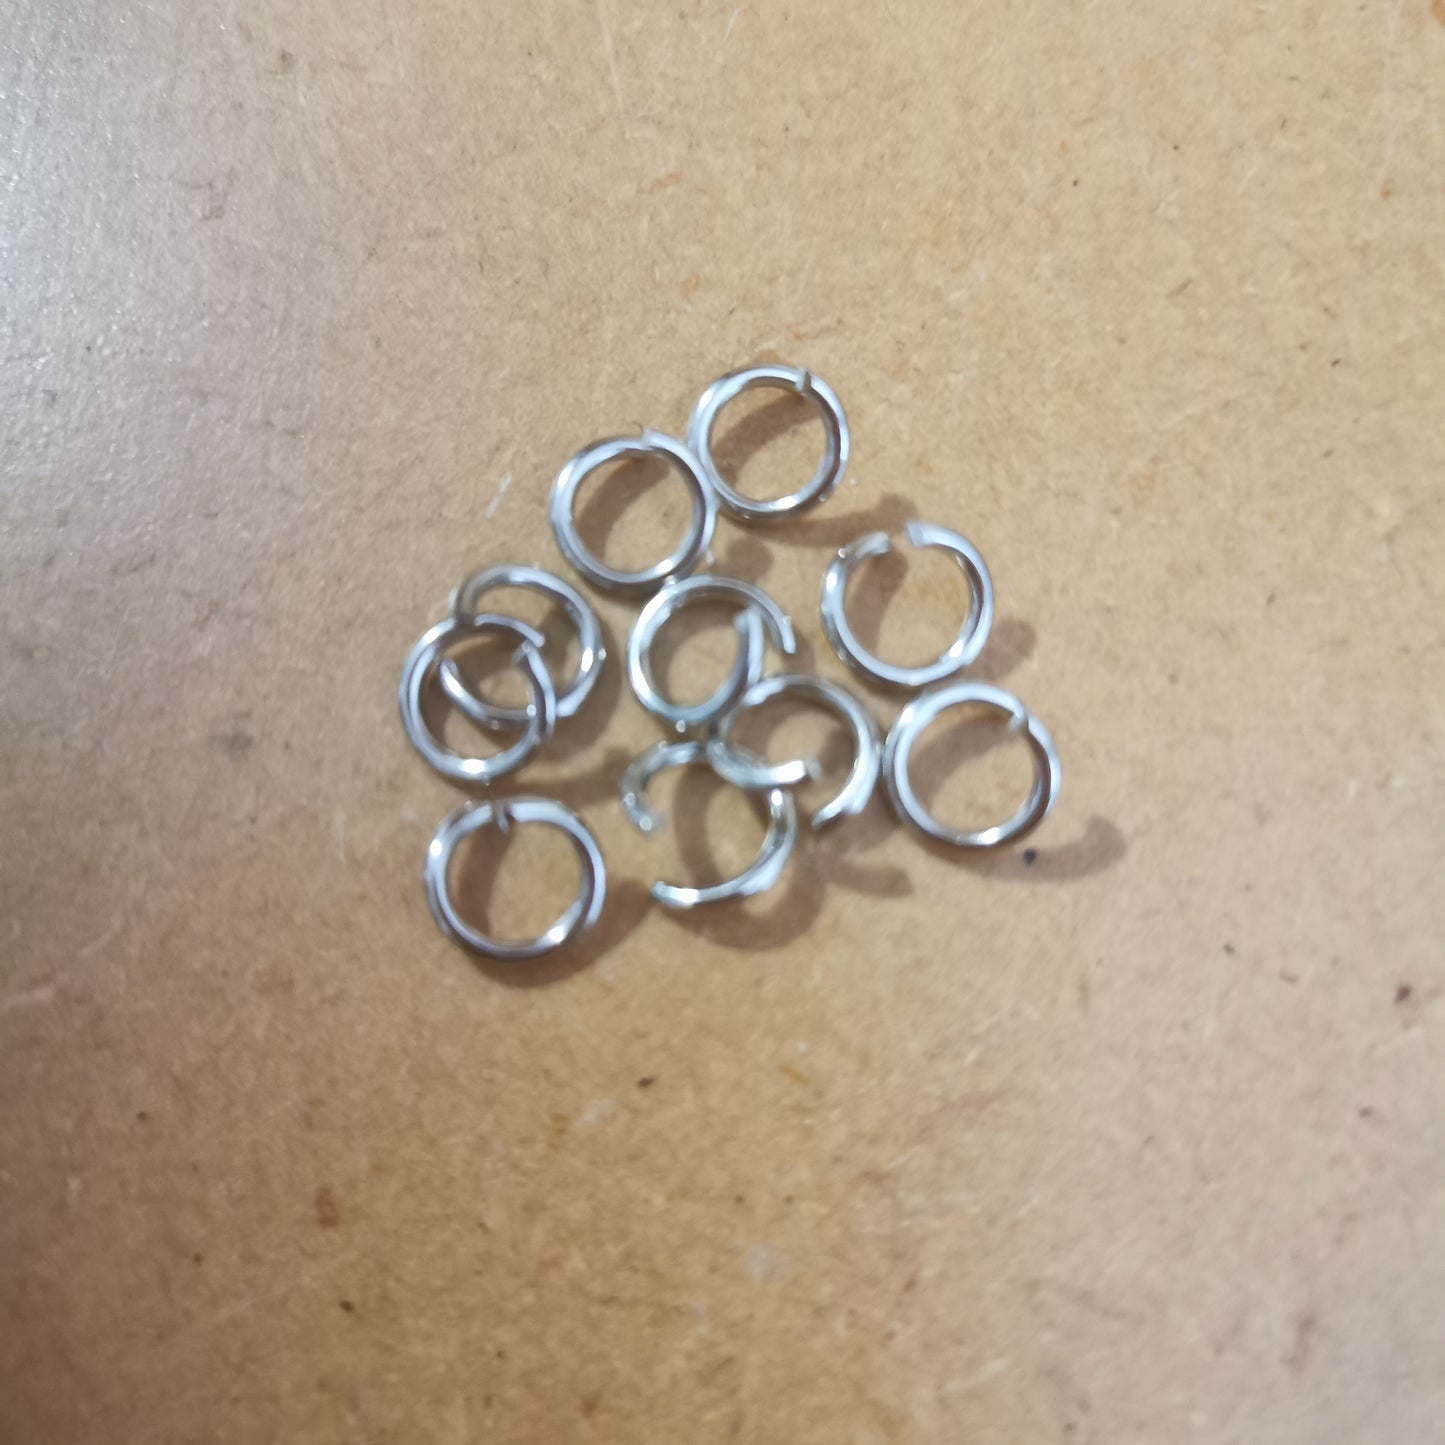 10 Jump Rings - Silver 8mm